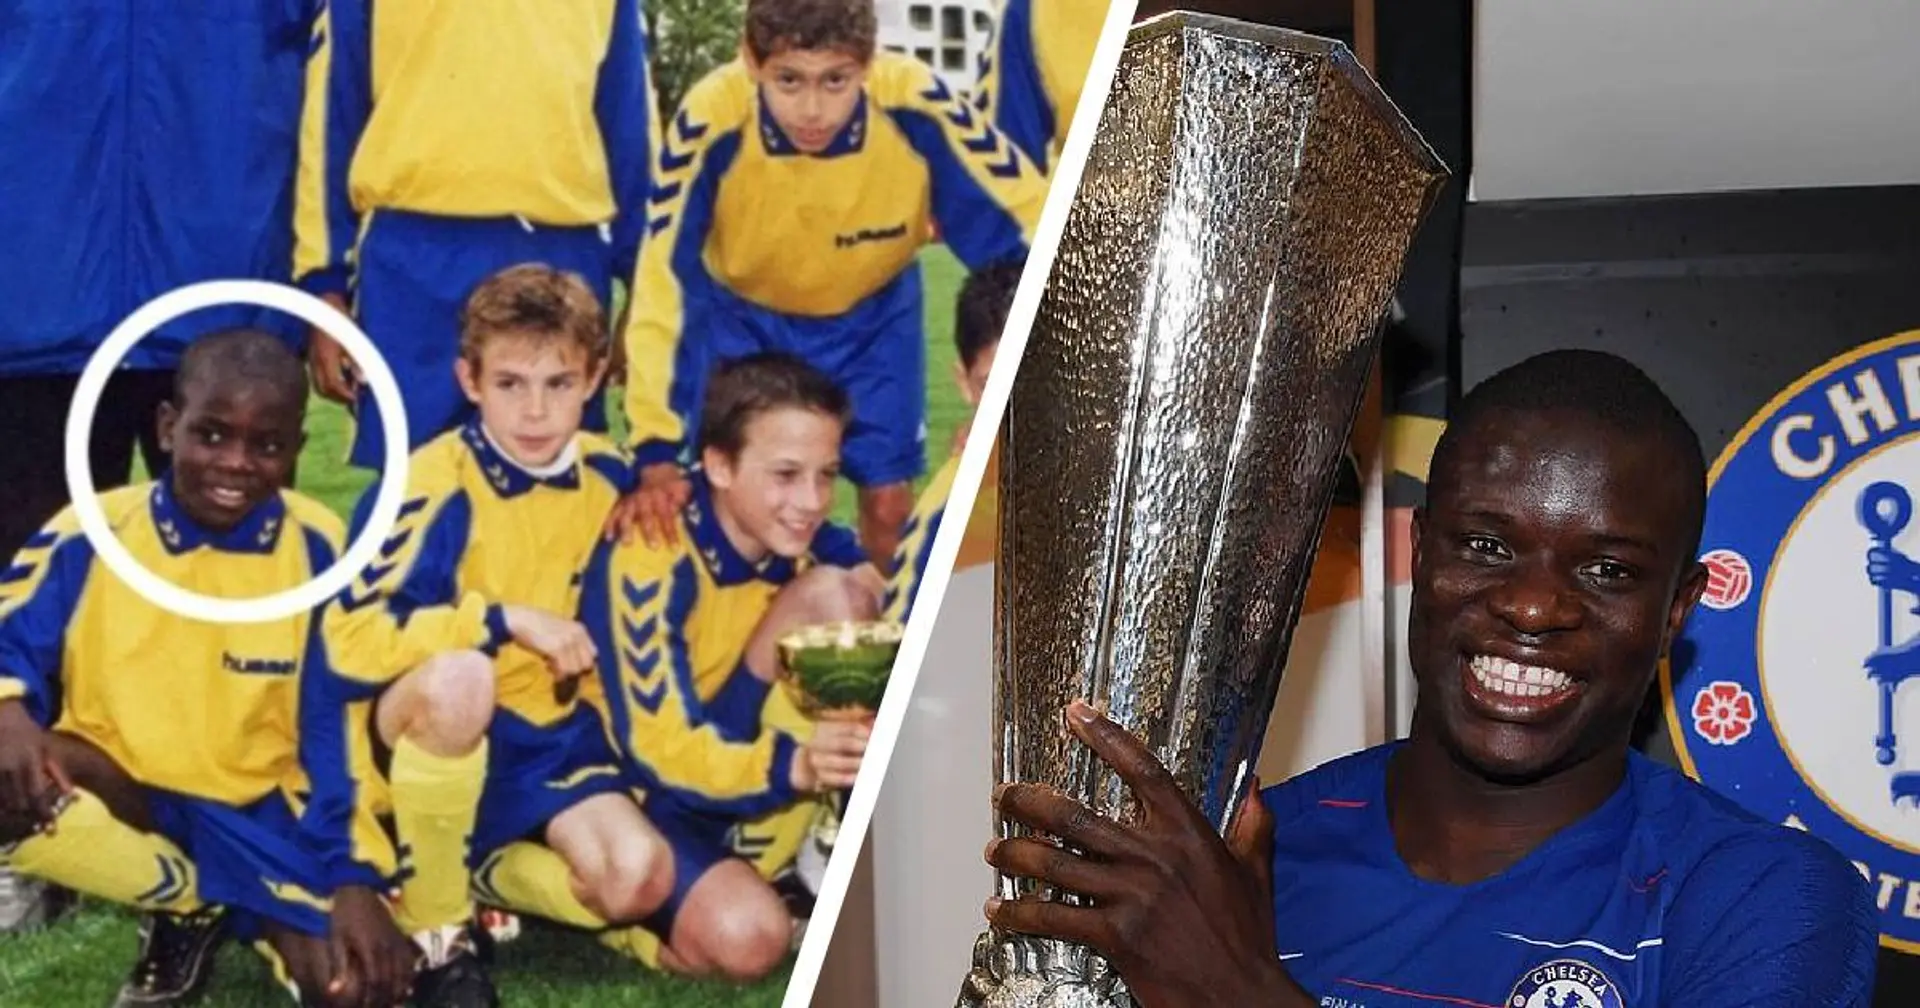 'Never give up, be like Kante': N'golo's incredible life and career summed up by Chelsea fan